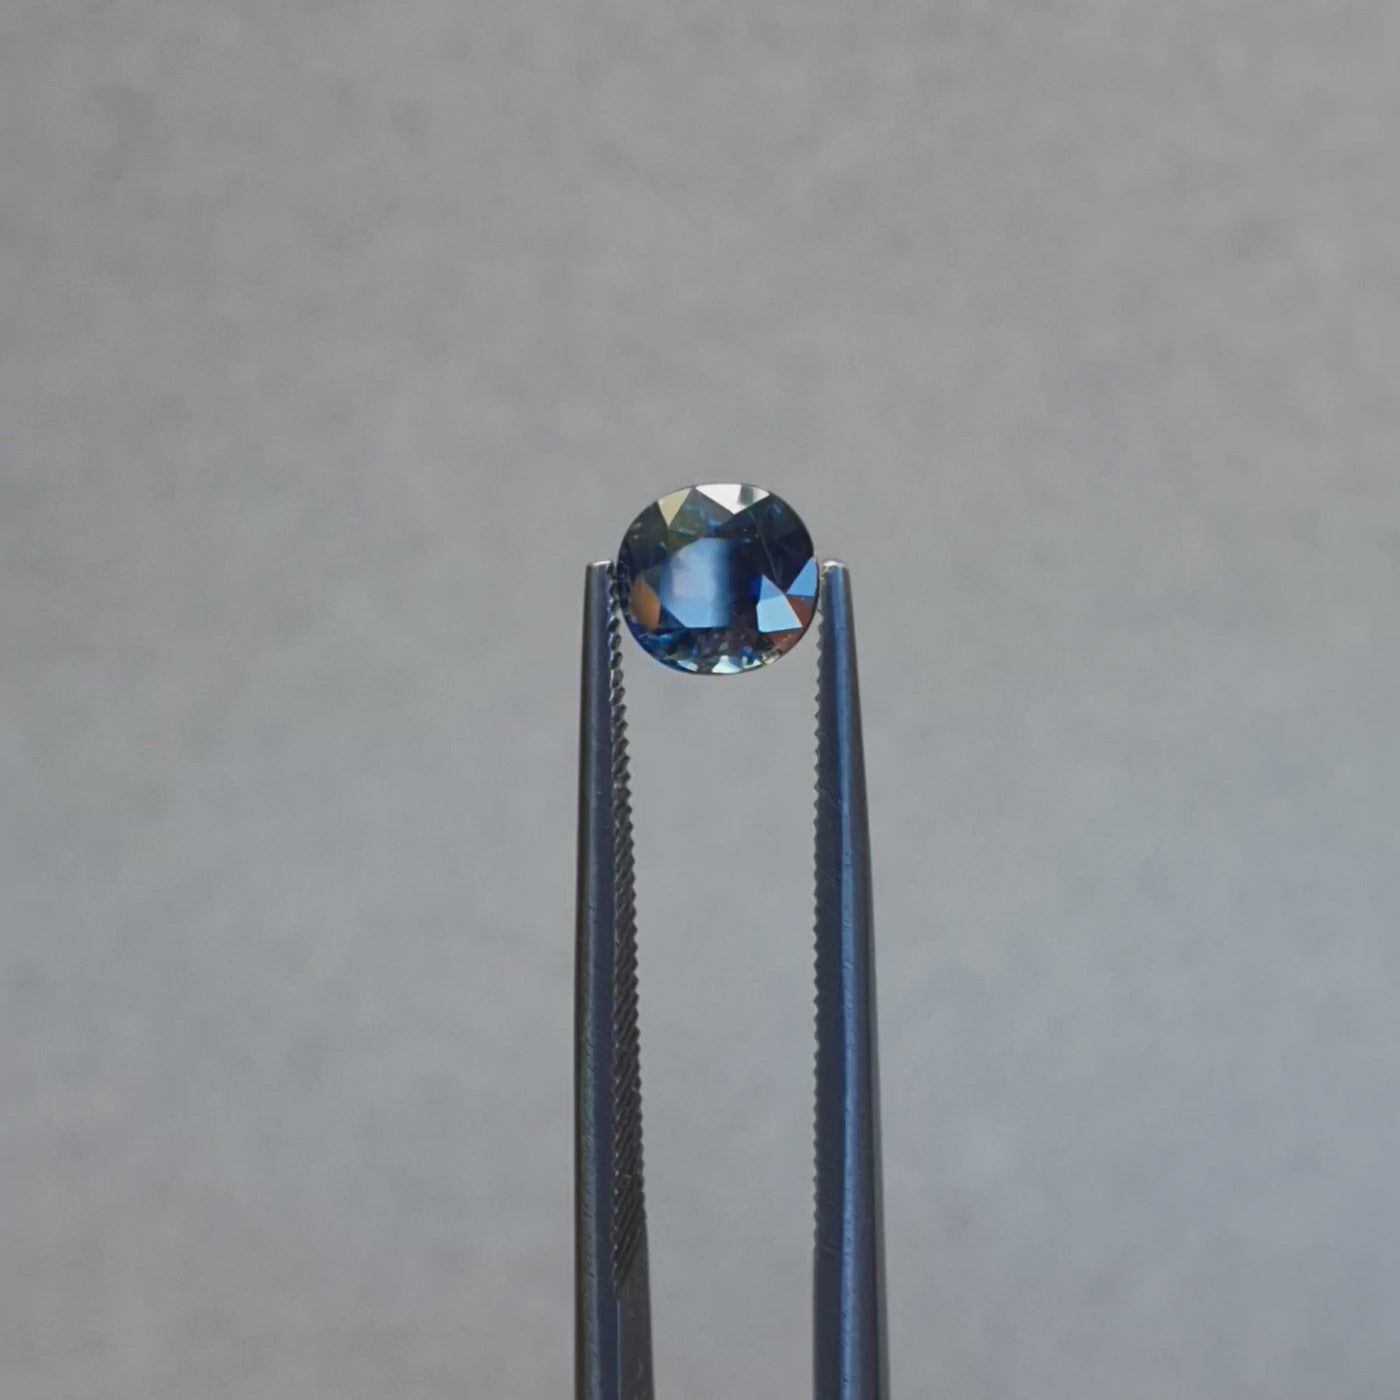 1.40ct Australian Sapphire, Parti, Blue, Teal, Yellow - Oval